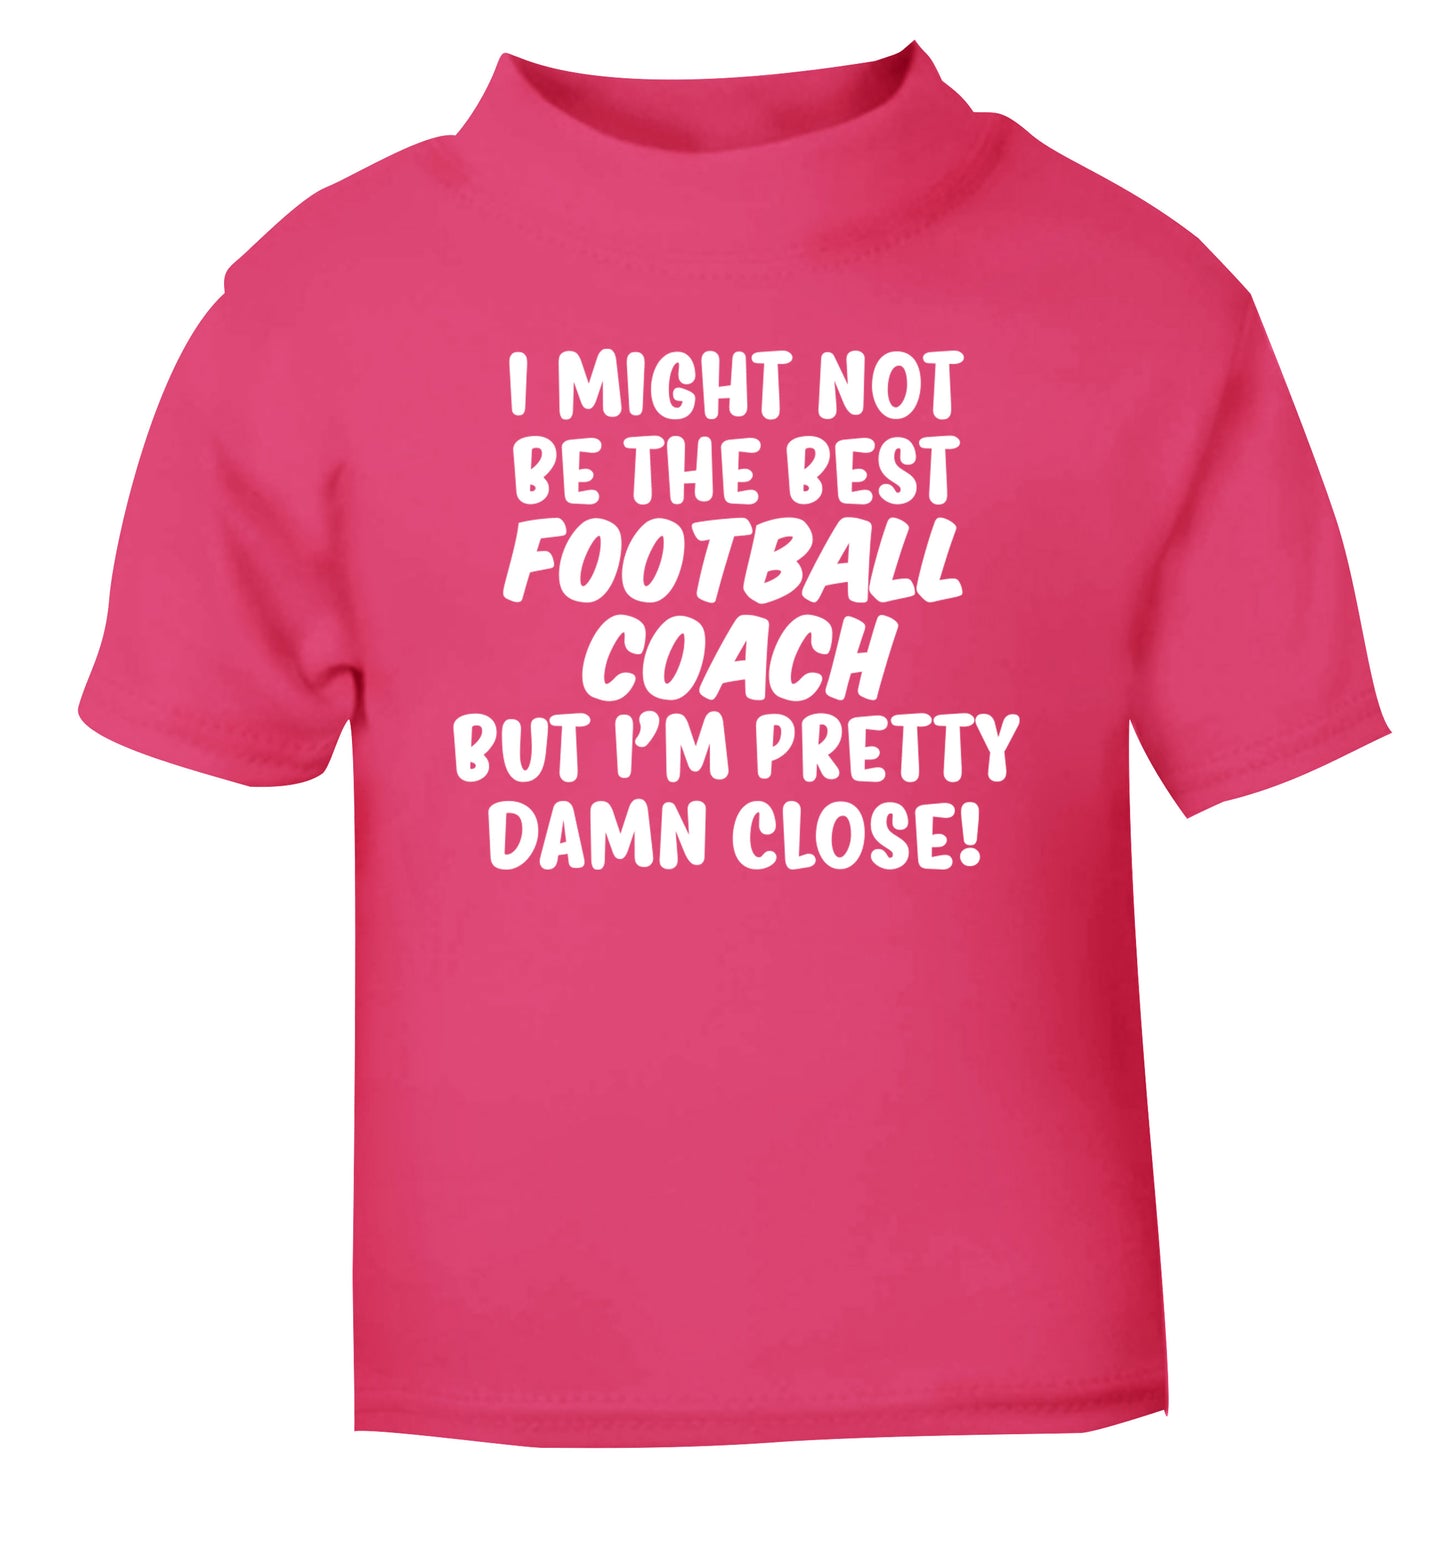 I might not be the best football coach but I'm pretty close! pink Baby Toddler Tshirt 2 Years